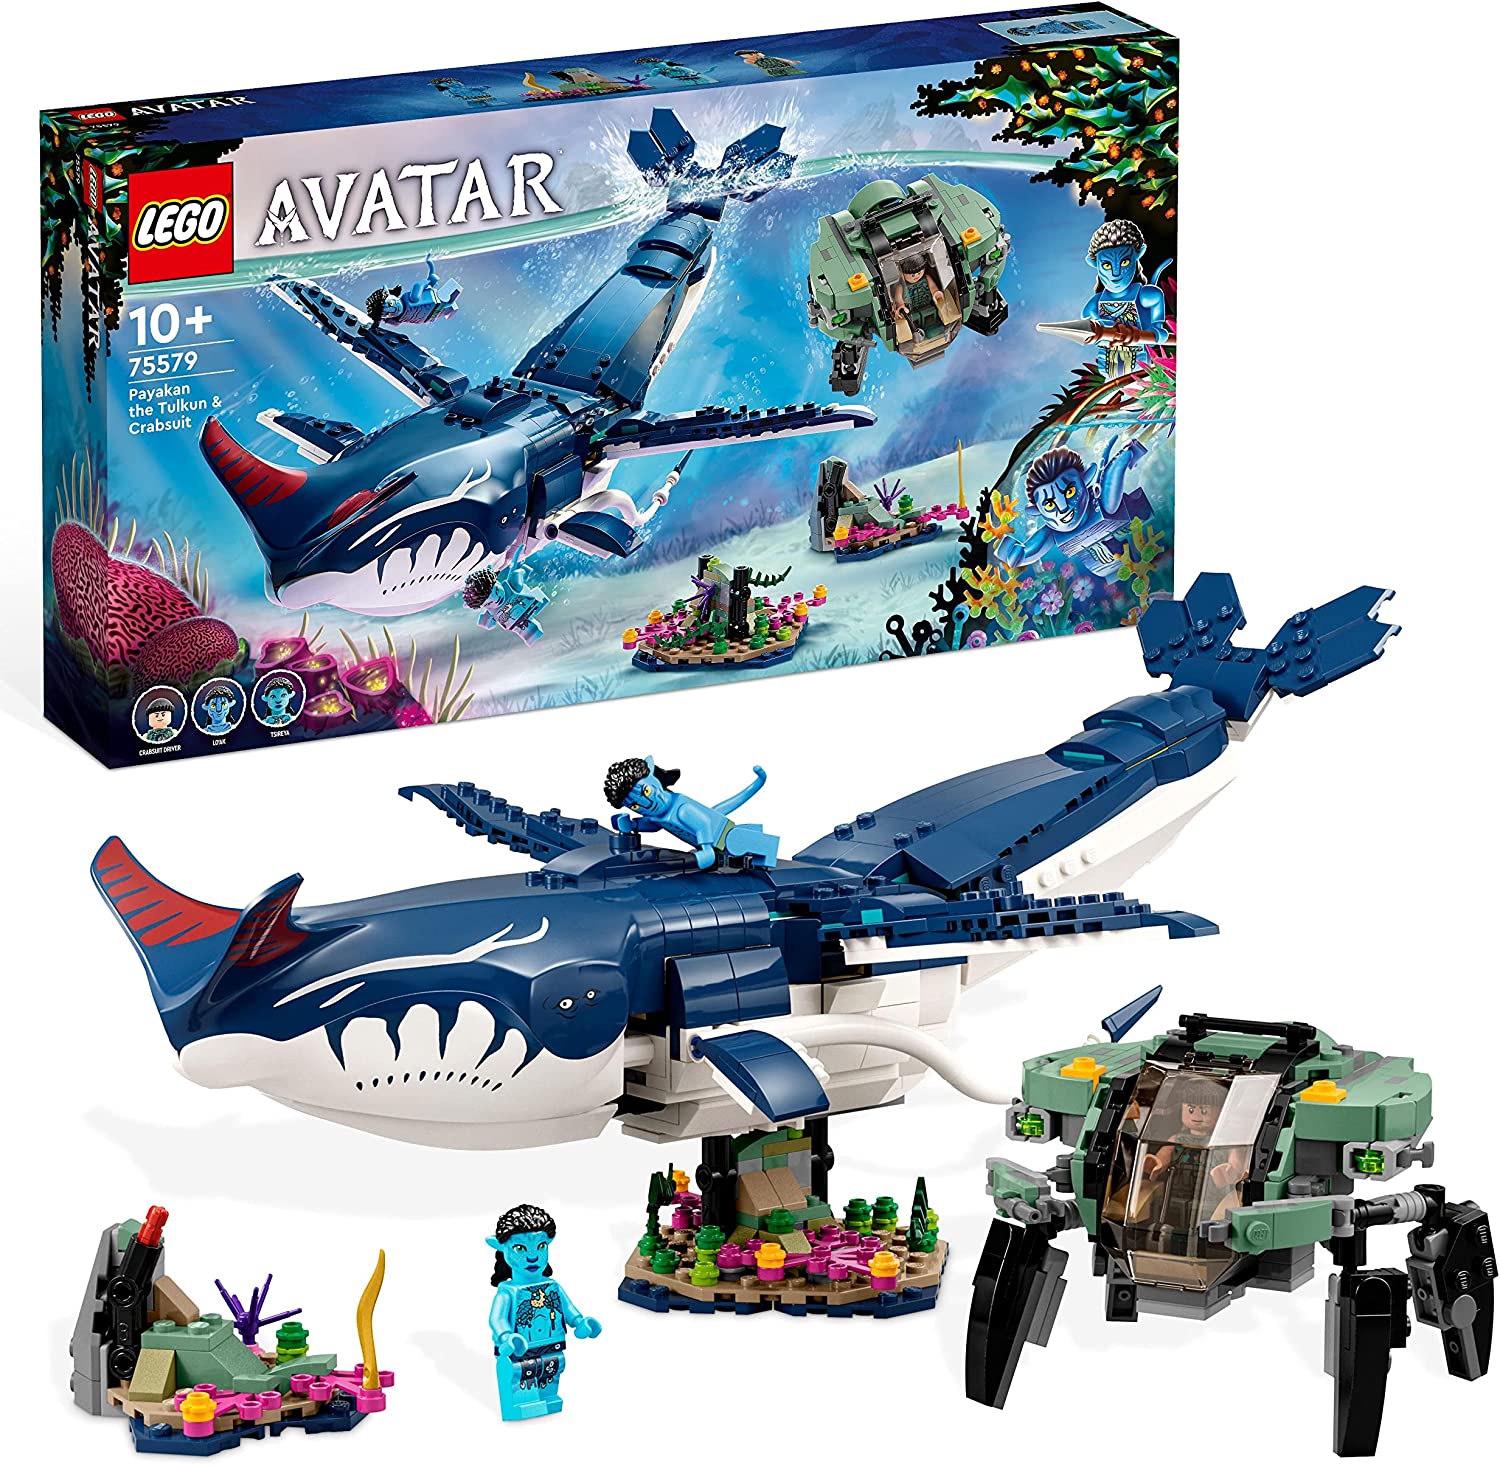 LEGO 75579 Avatar Payakan the Tulkun and Crab Suit, The Way of Water Ocean Toy for Building with Sea Animal Figure for Children and Movie Fans